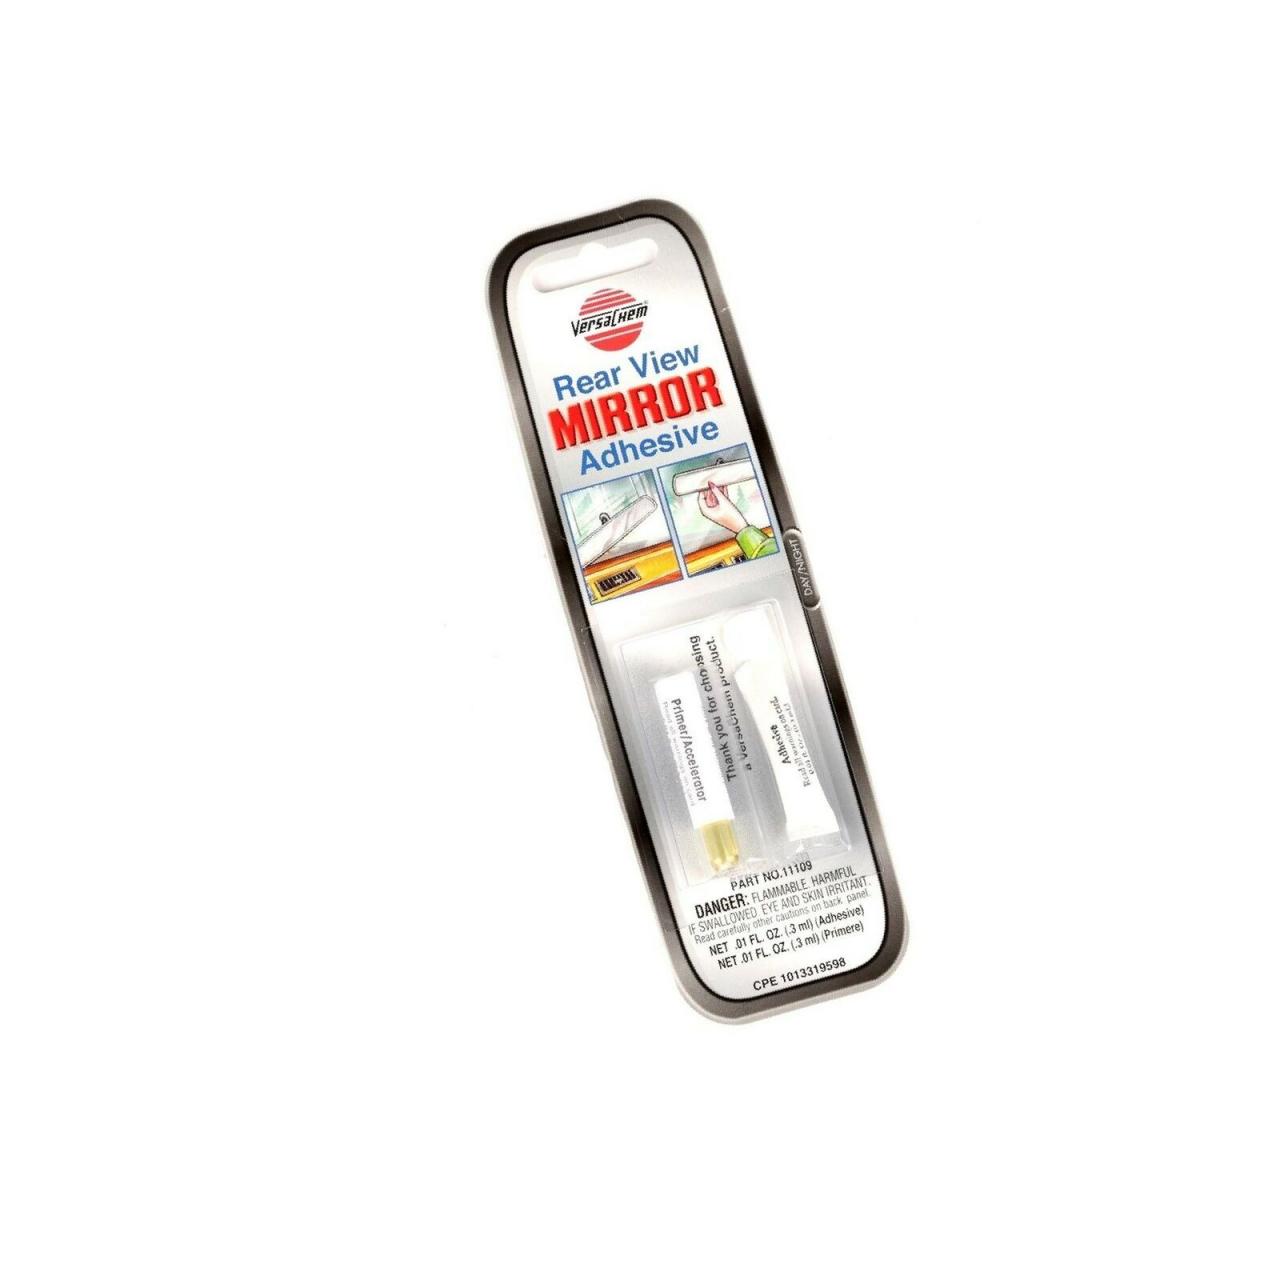 Best Rear View Mirror Glue: Top Adhesive Kit Reviews of 2021